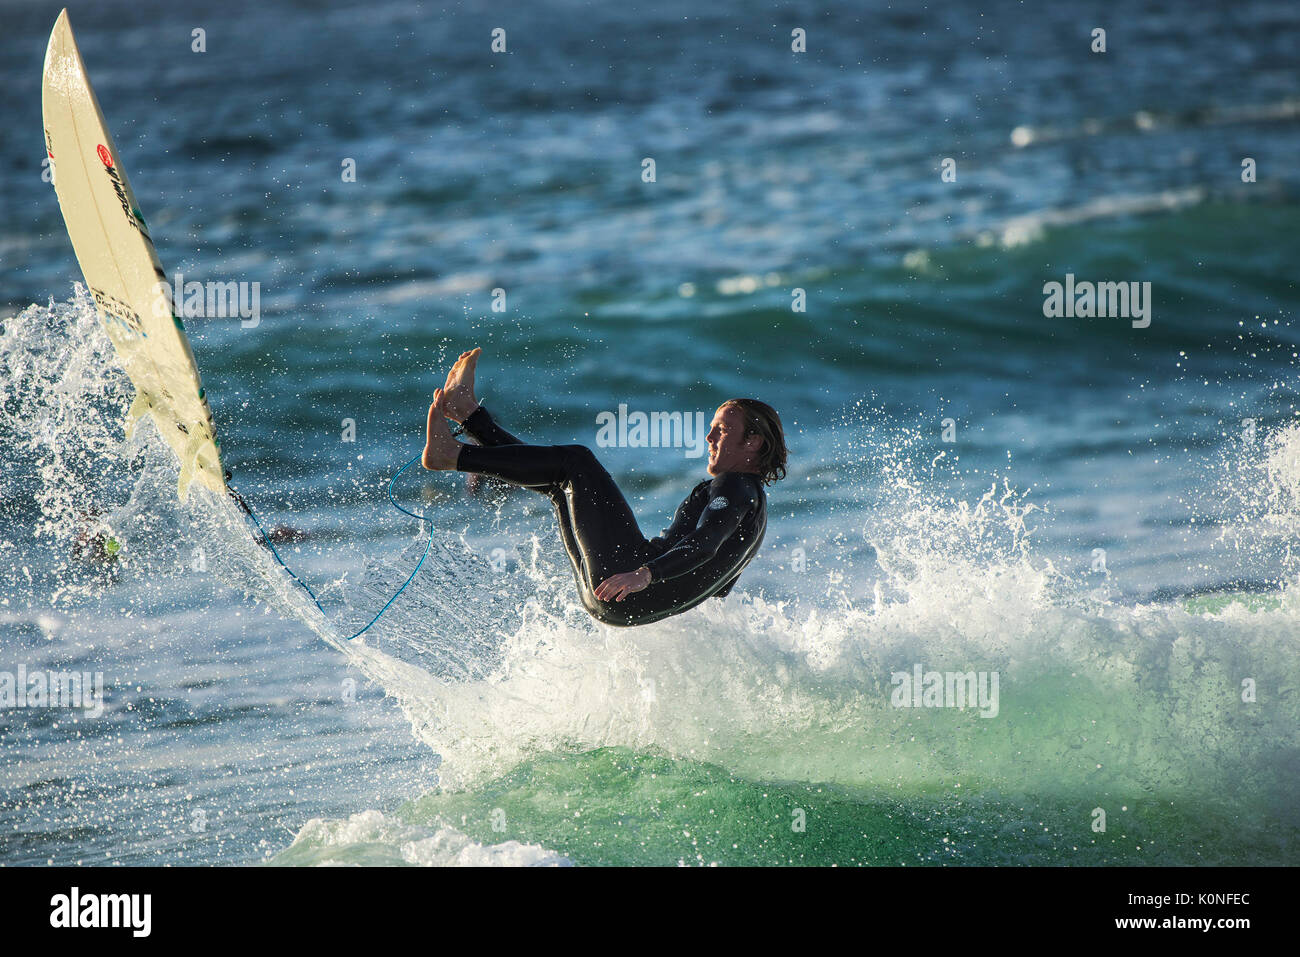 A wipe out for a surfer at Fistral beach in Newquay. Stock Photo